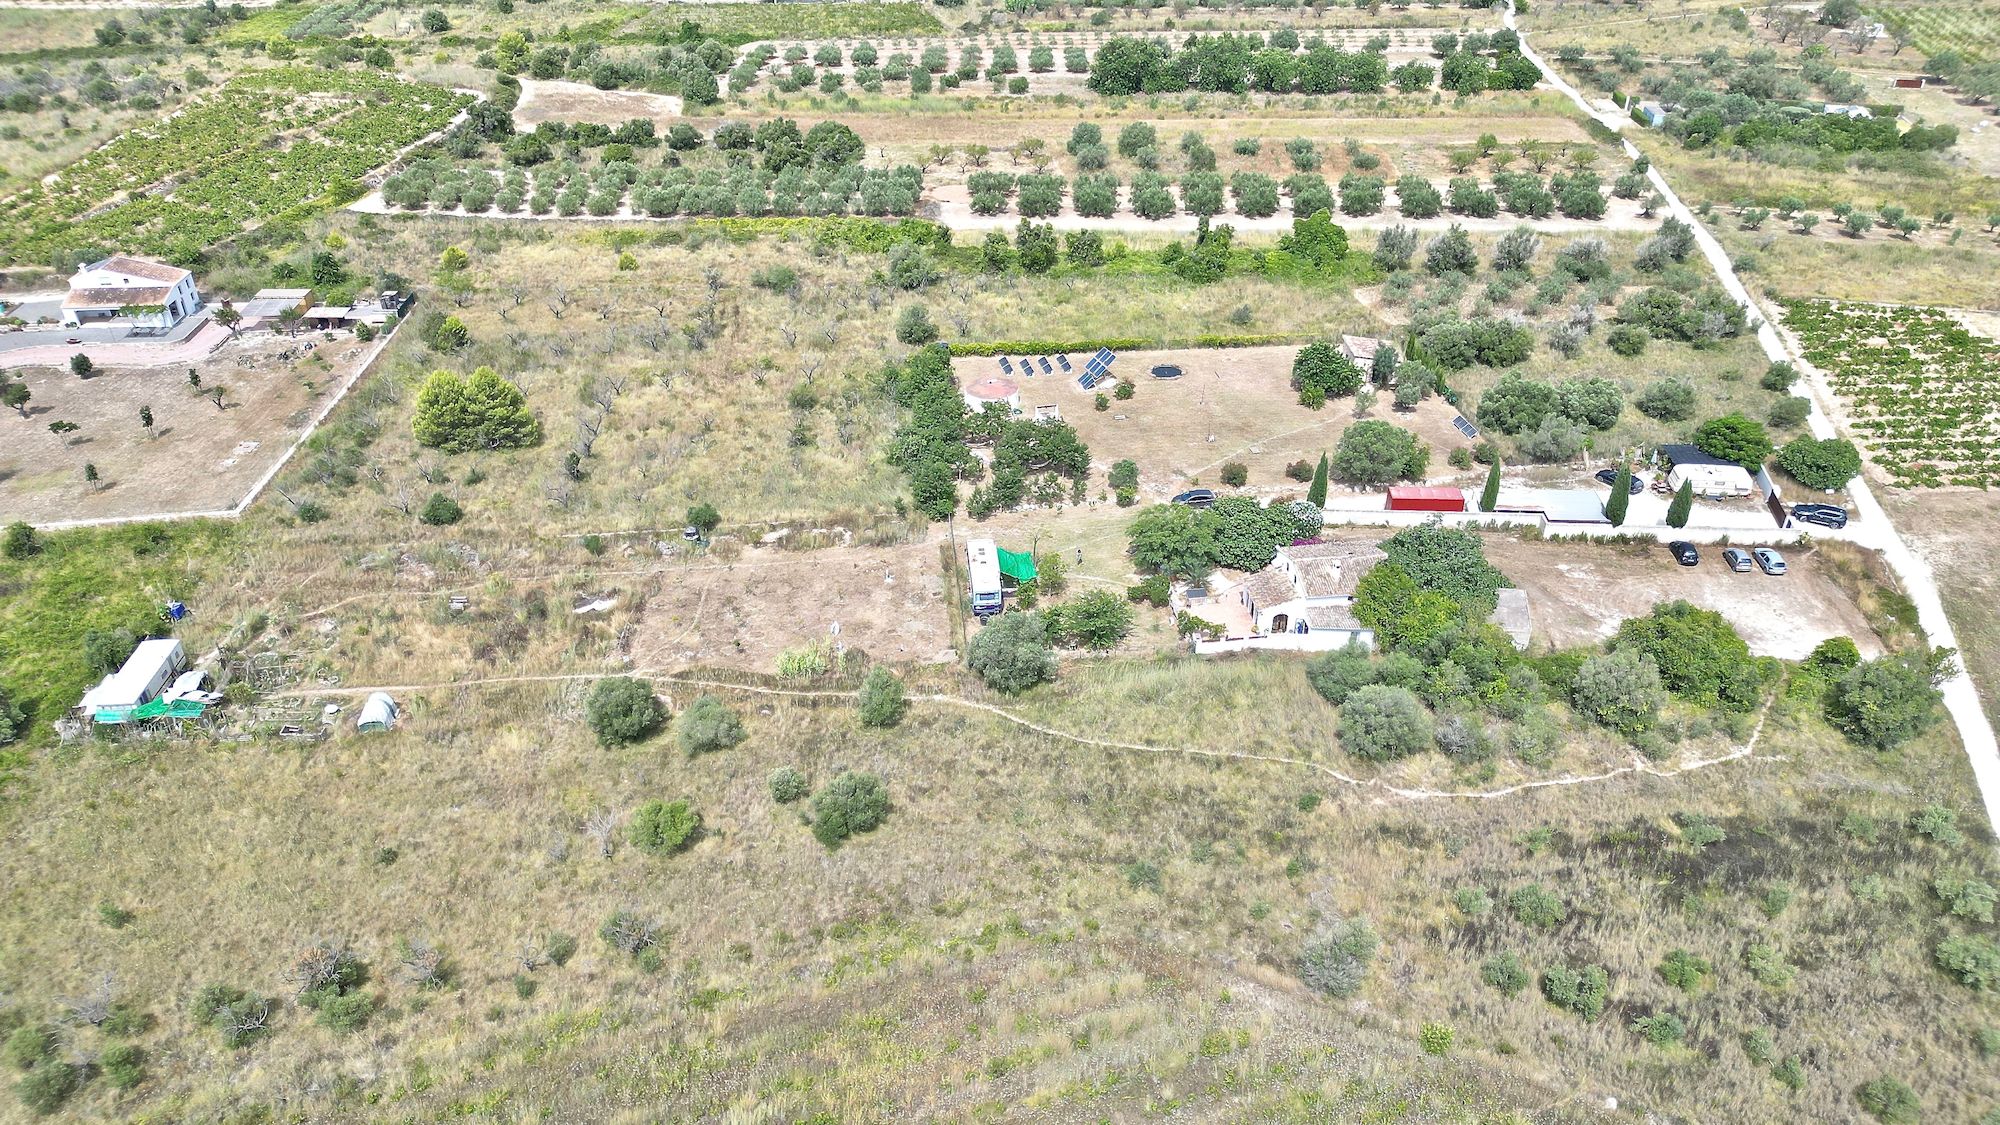 Self-sustaining Finca Rustica for Sale in the Montgo valley of Javea